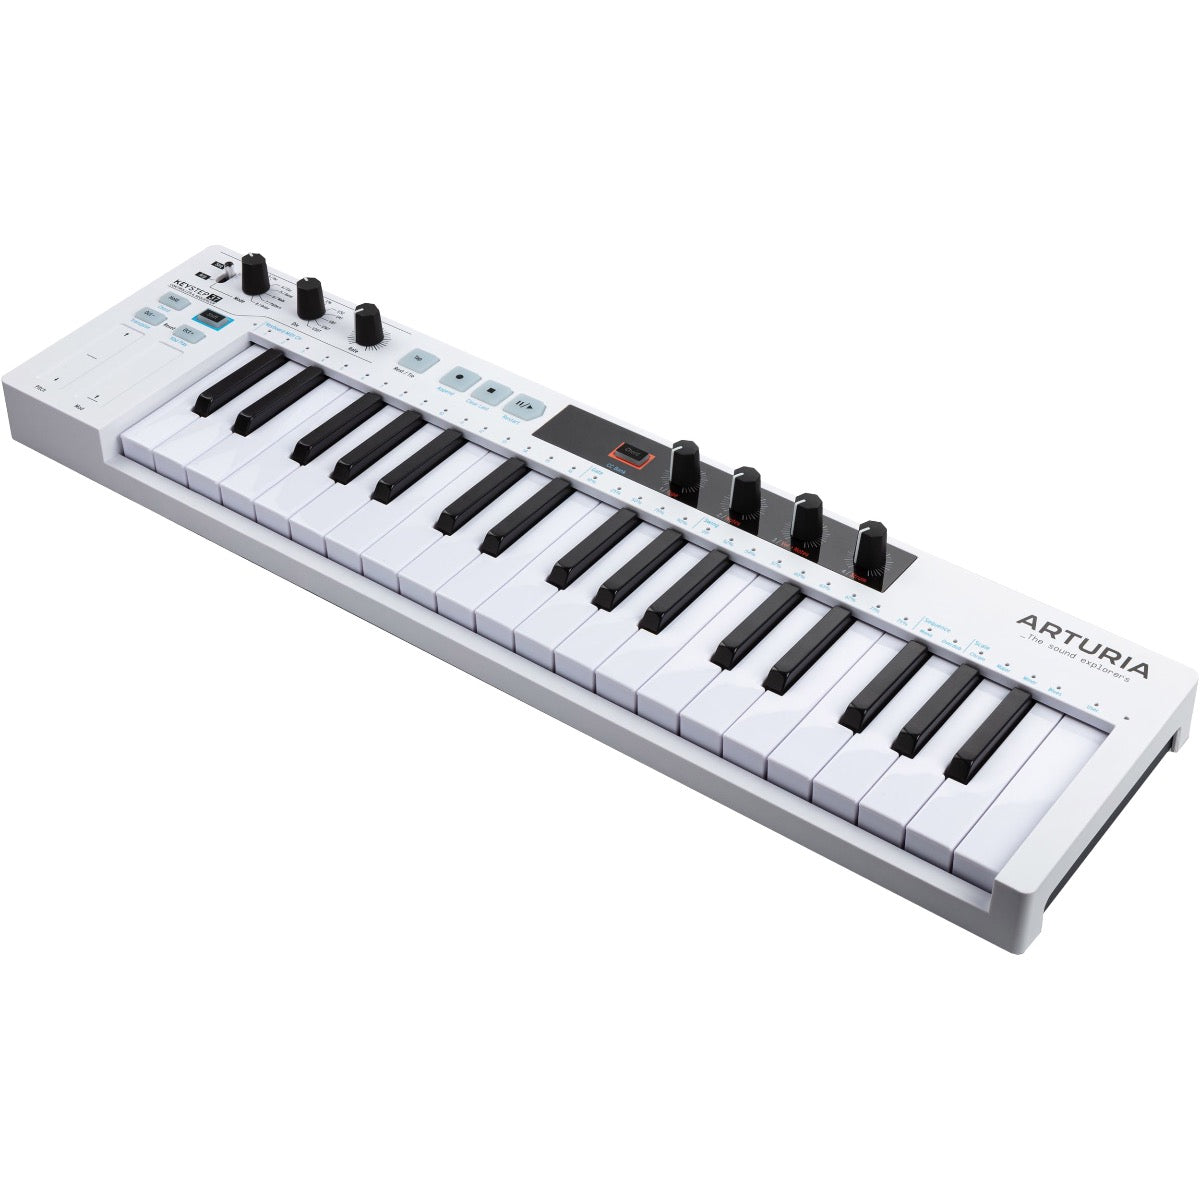 Arturia KeyStep 37 Controller and Sequencer BASIC CABLE KIT